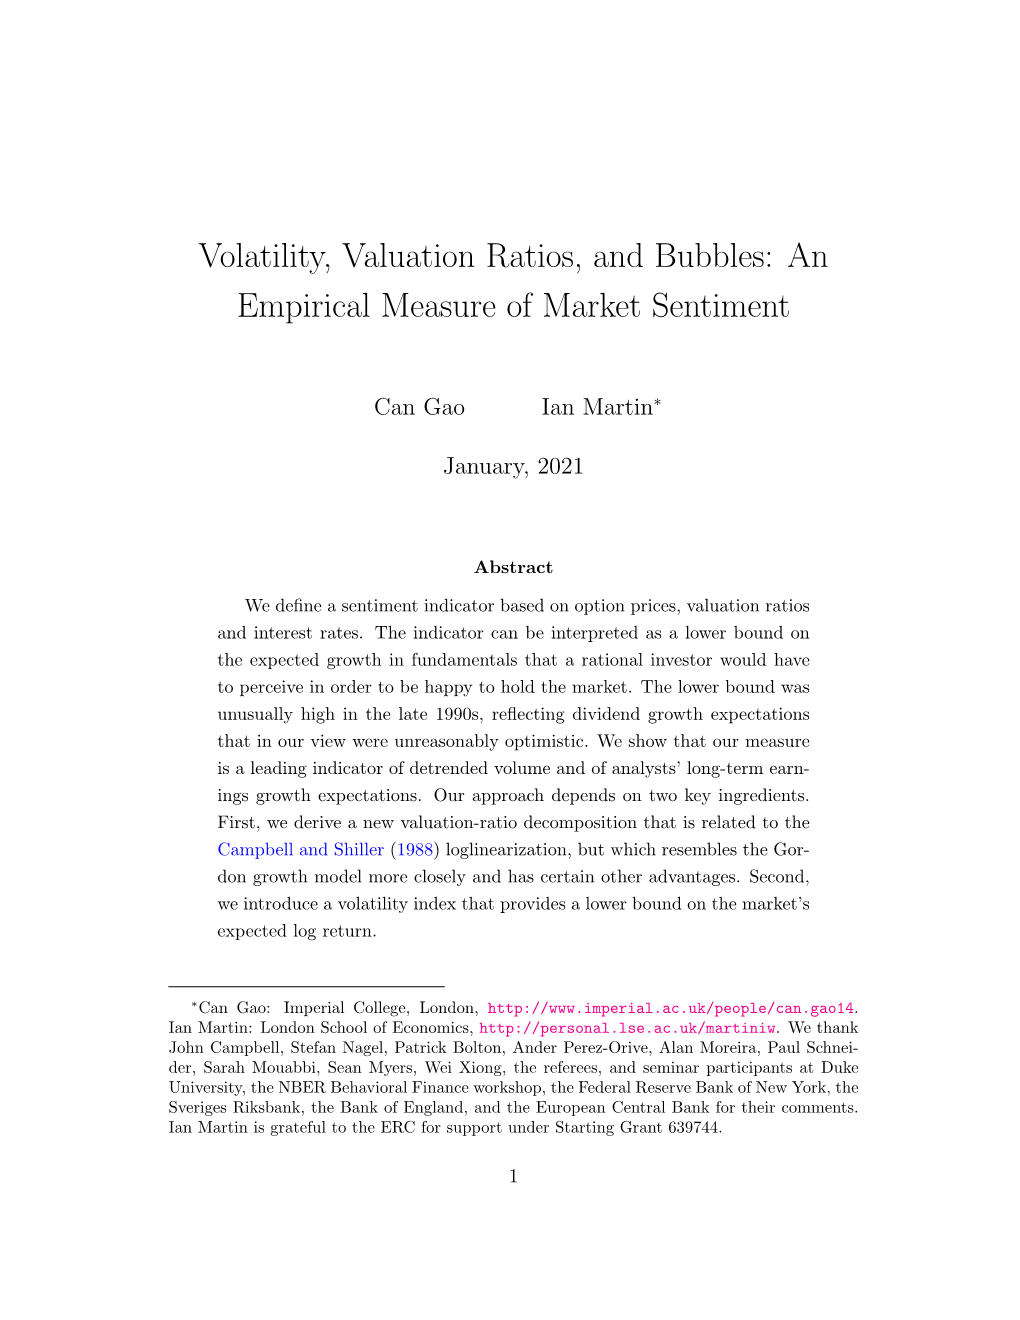 Volatility, Valuation Ratios, and Bubbles: an Empirical Measure of Market Sentiment